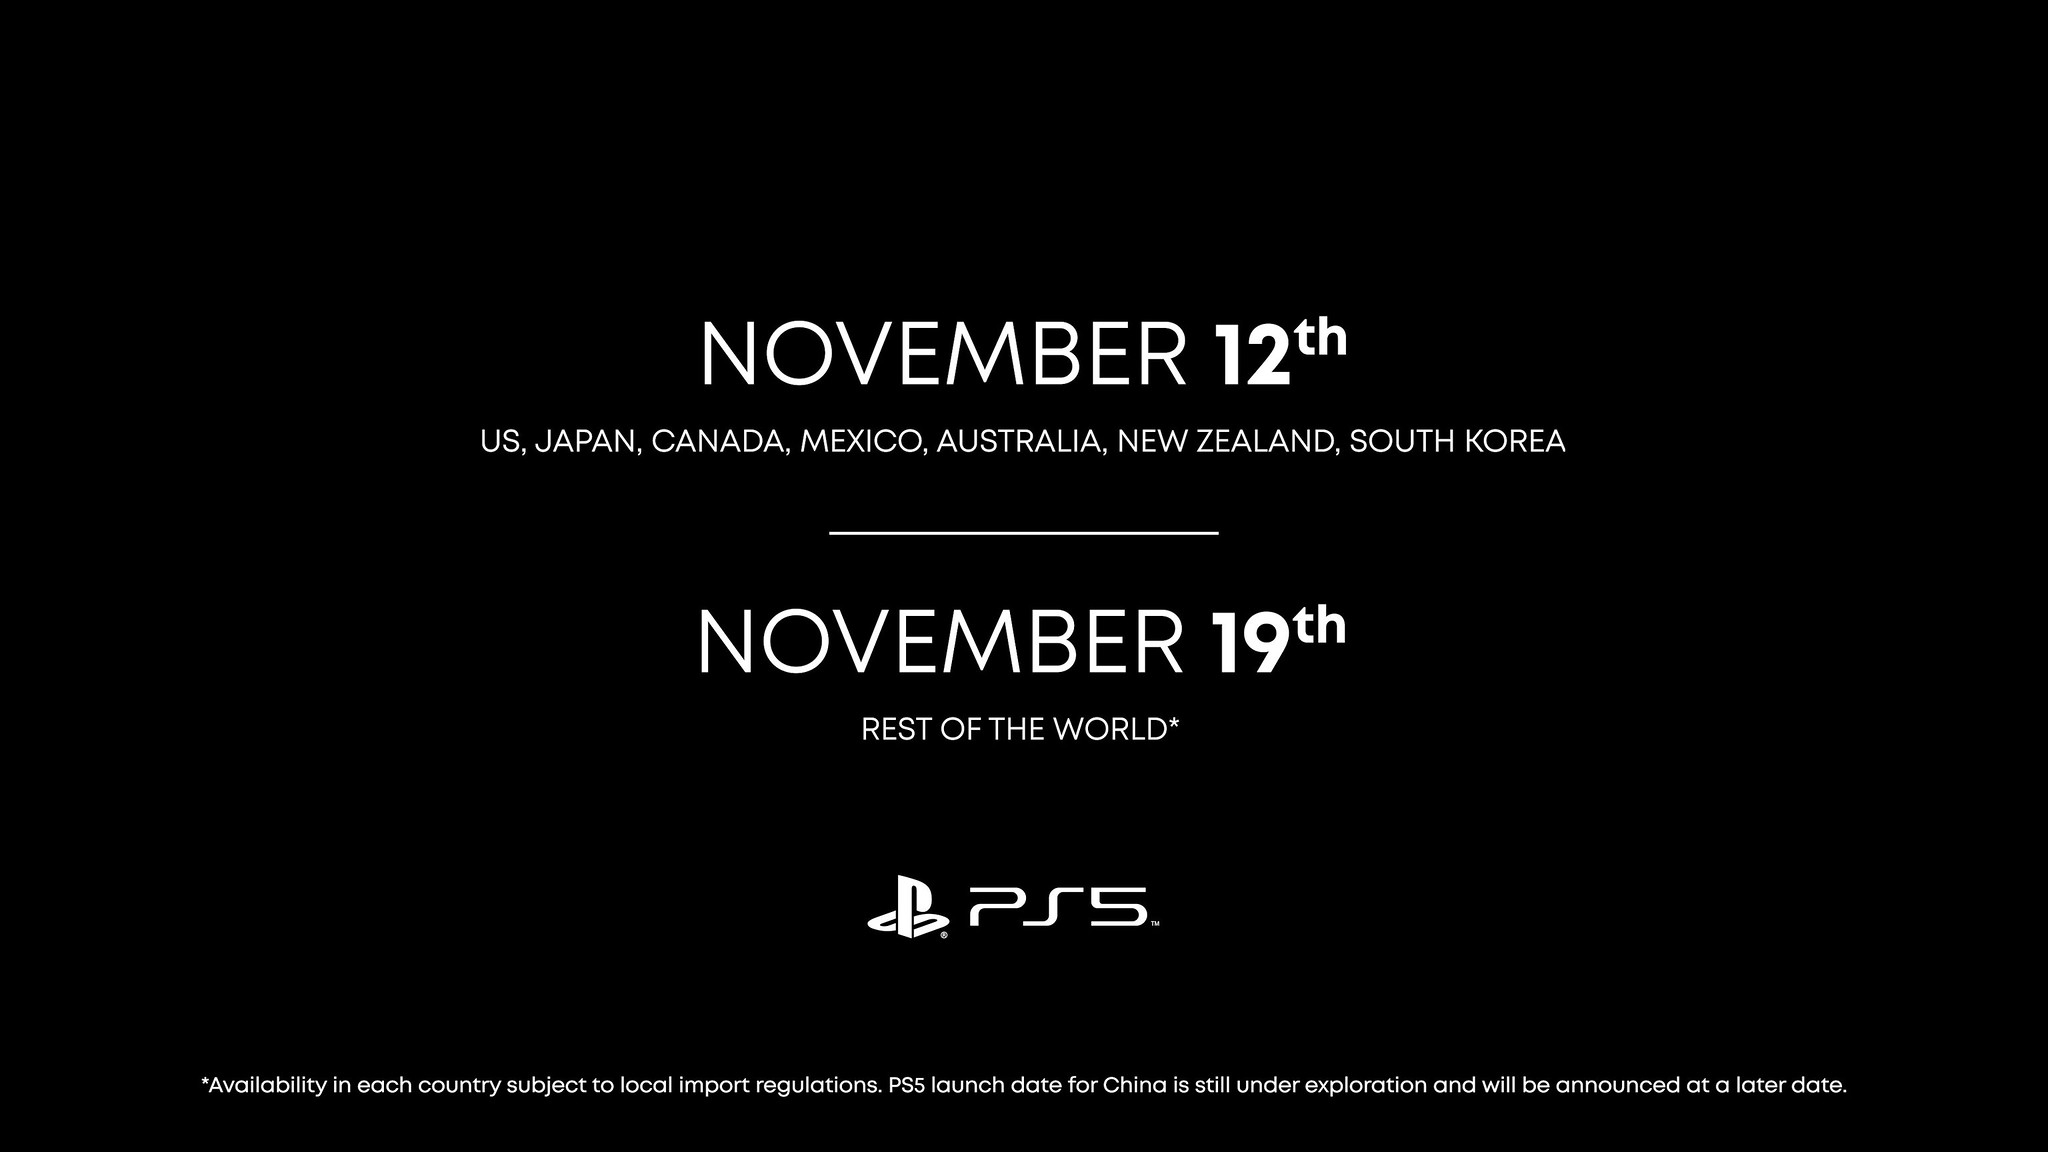 Playstation 5 launch date